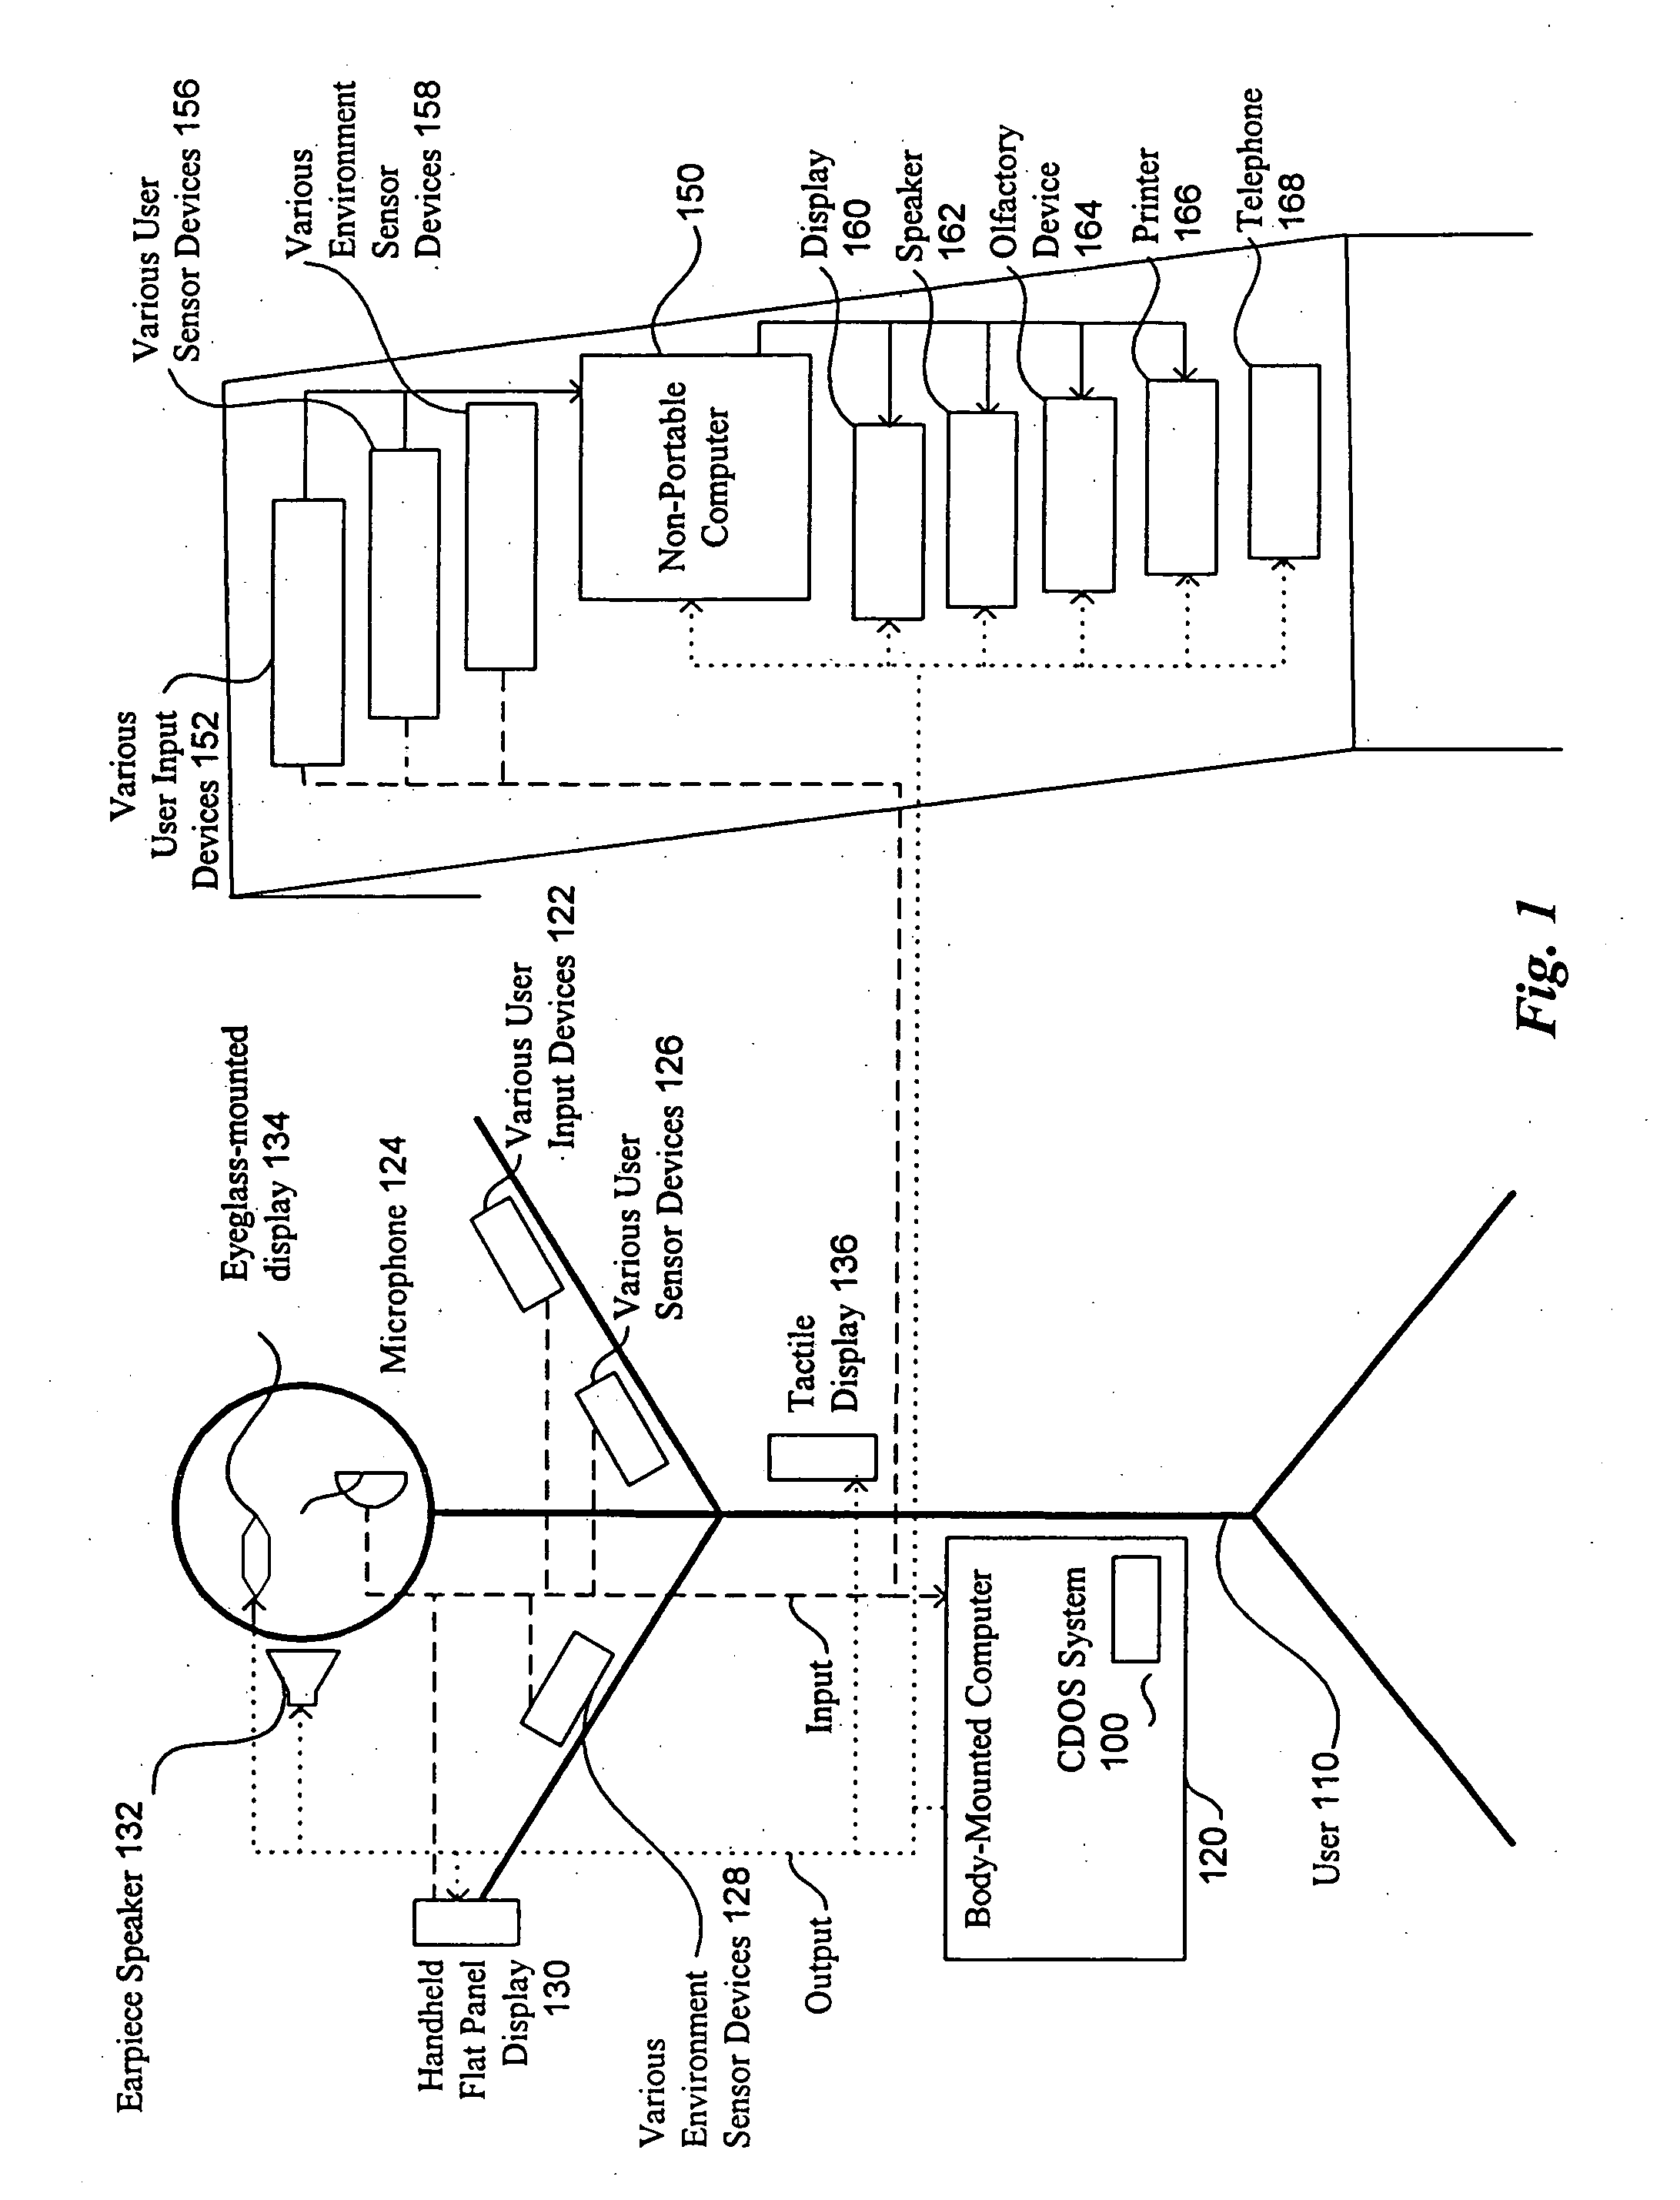 Method and system for controlling presentation of information to a user based on the user's condition